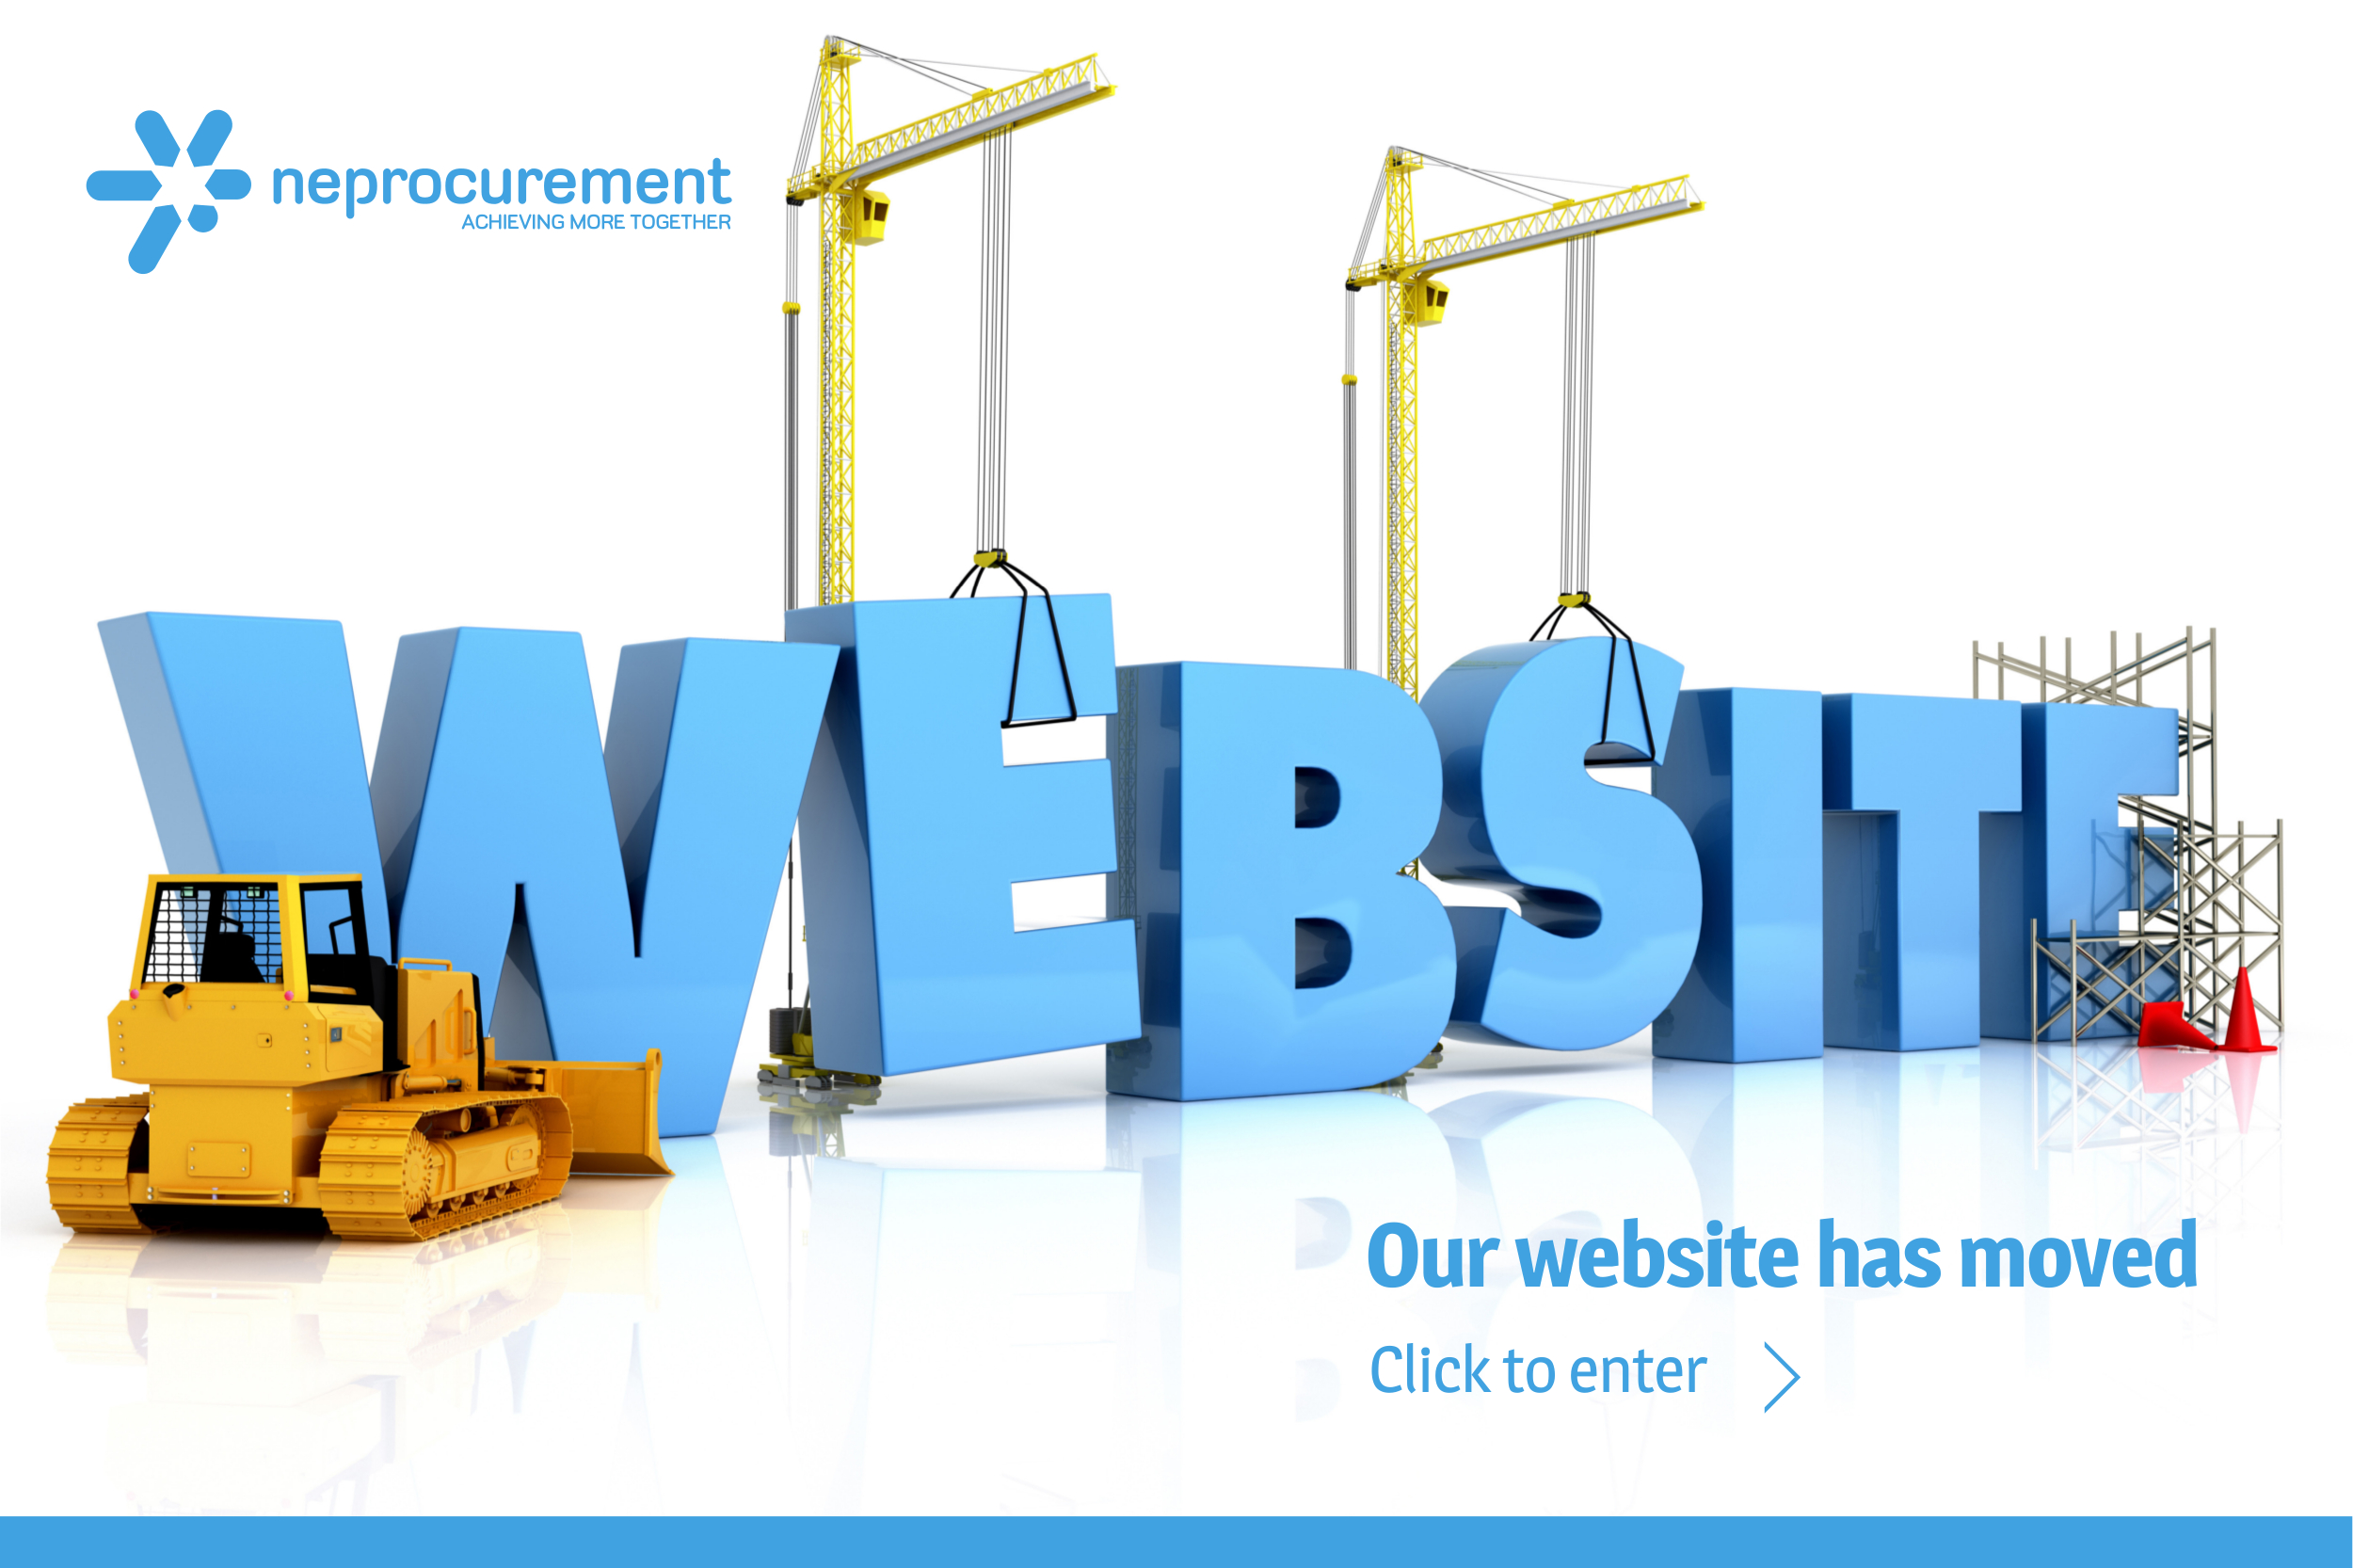 Our website has moved: click to enter.